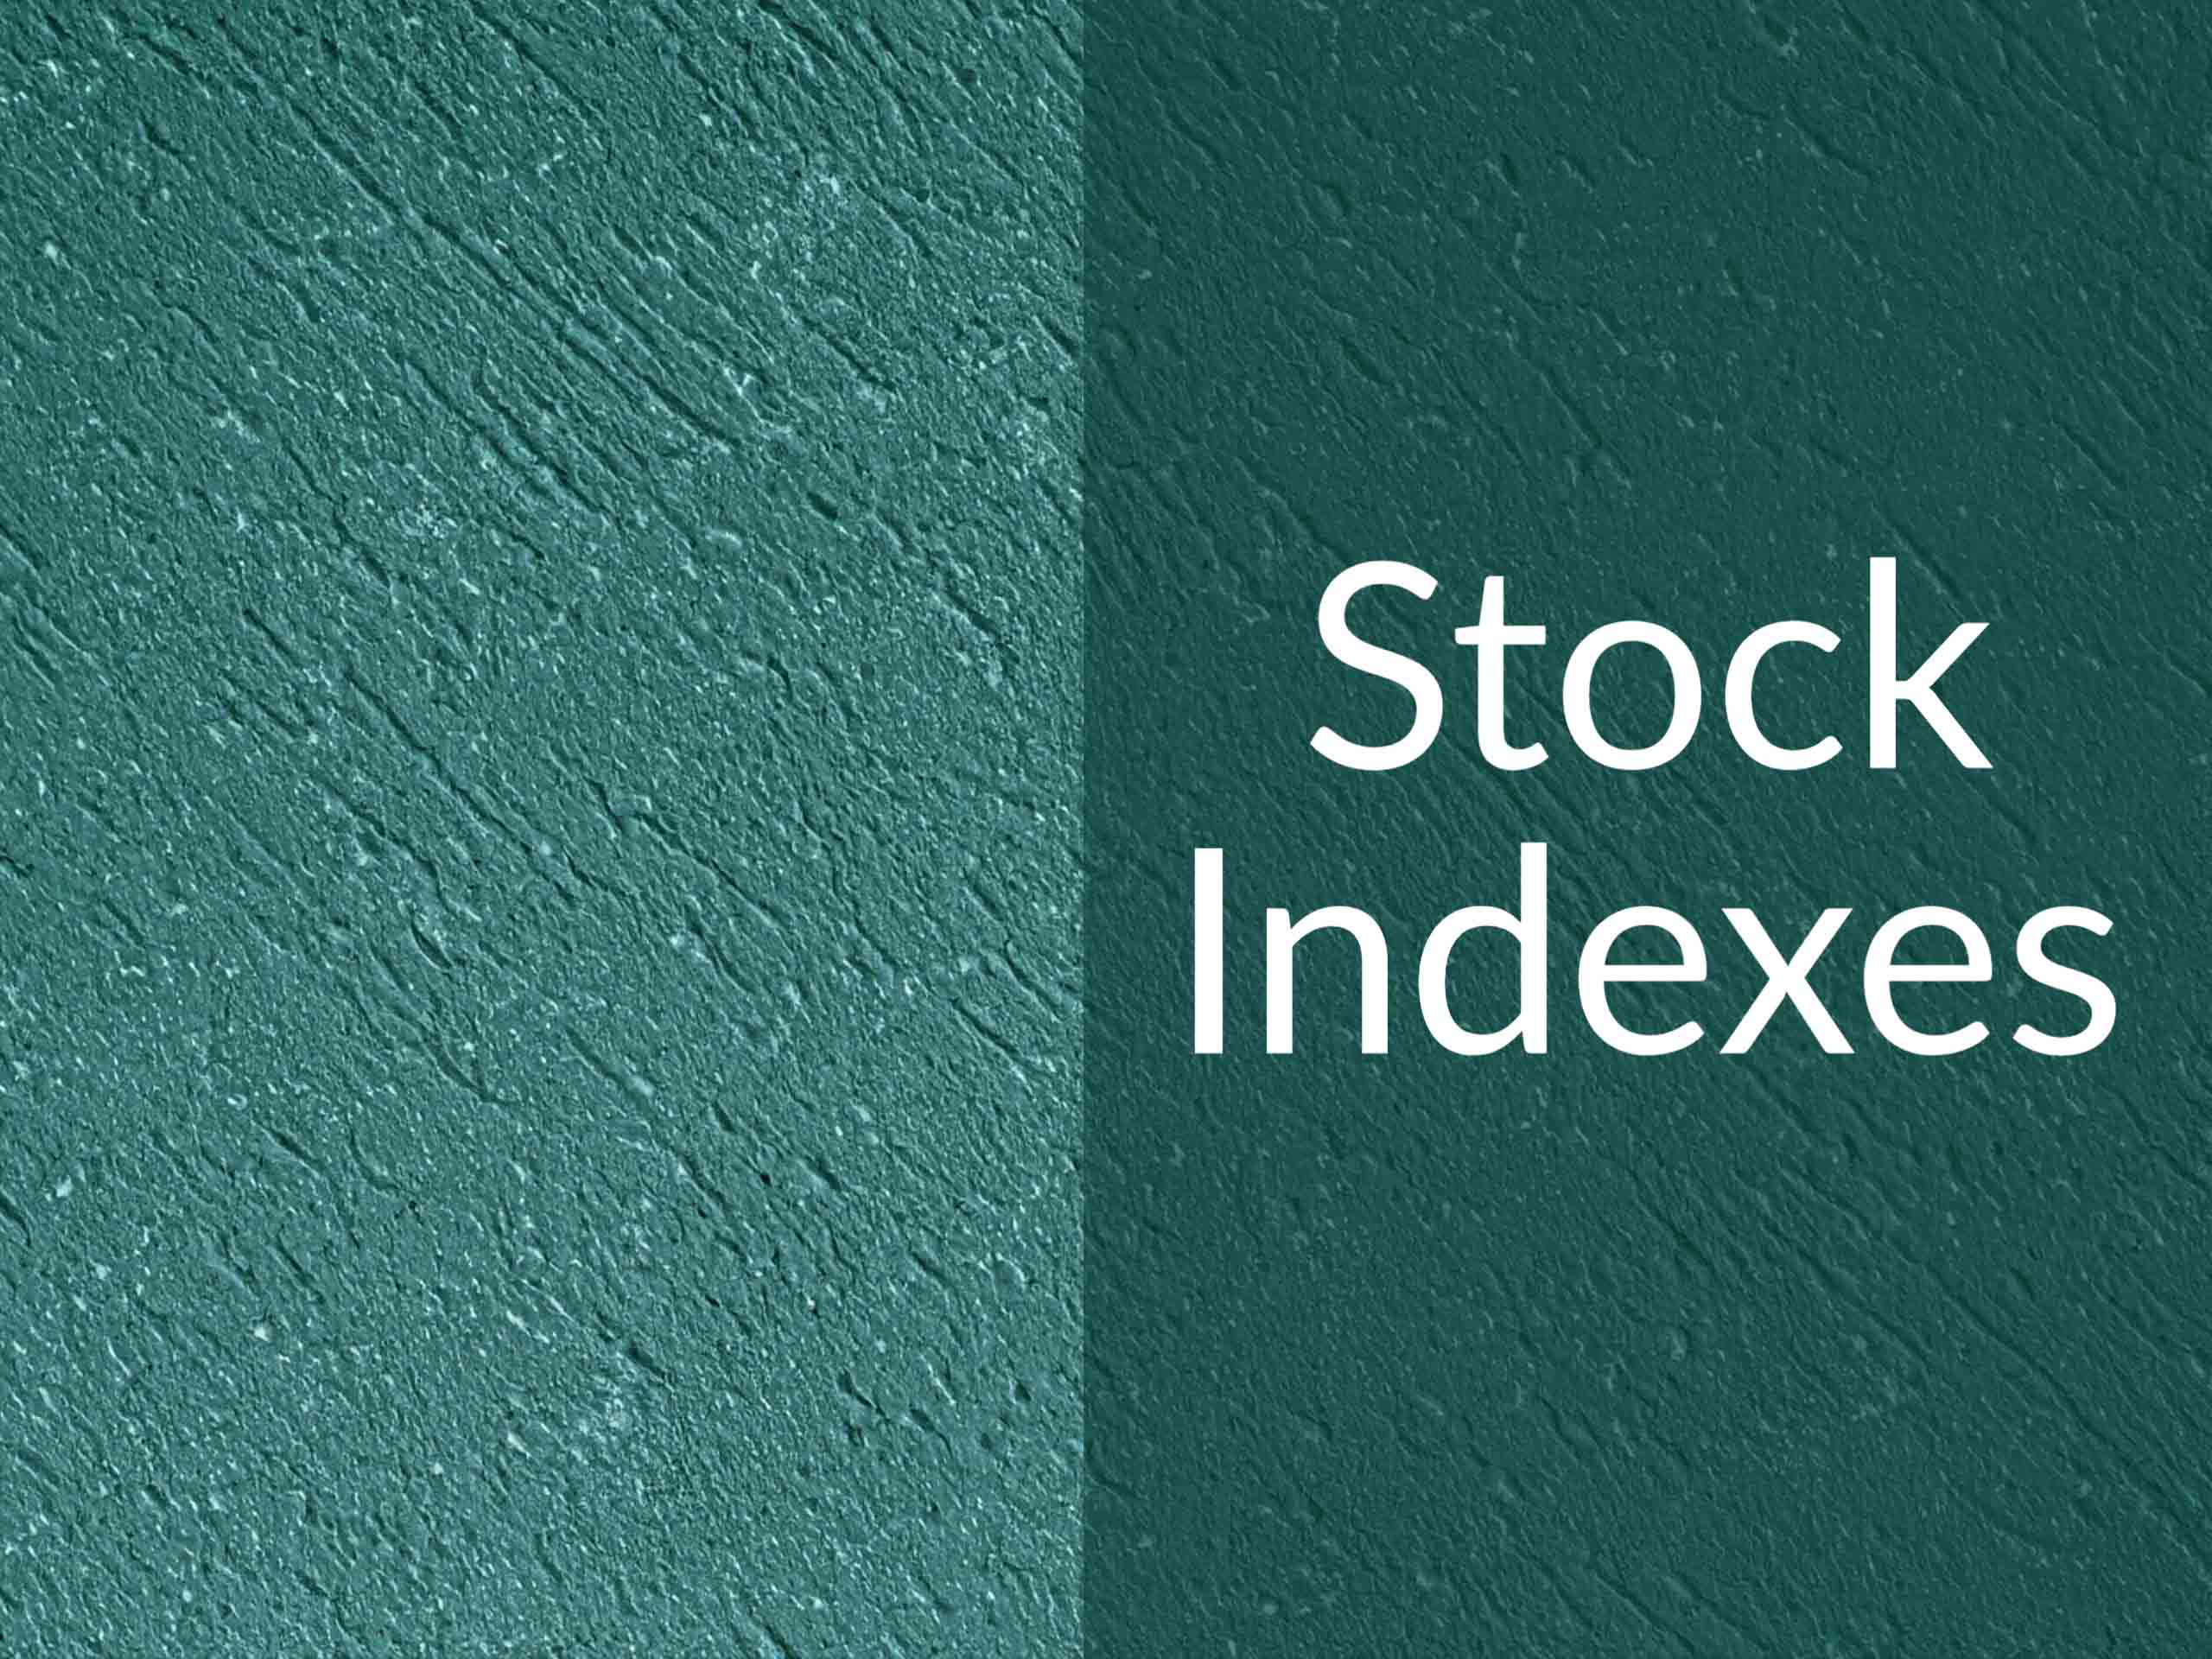 Painted wall with caption "Stock Indexes"